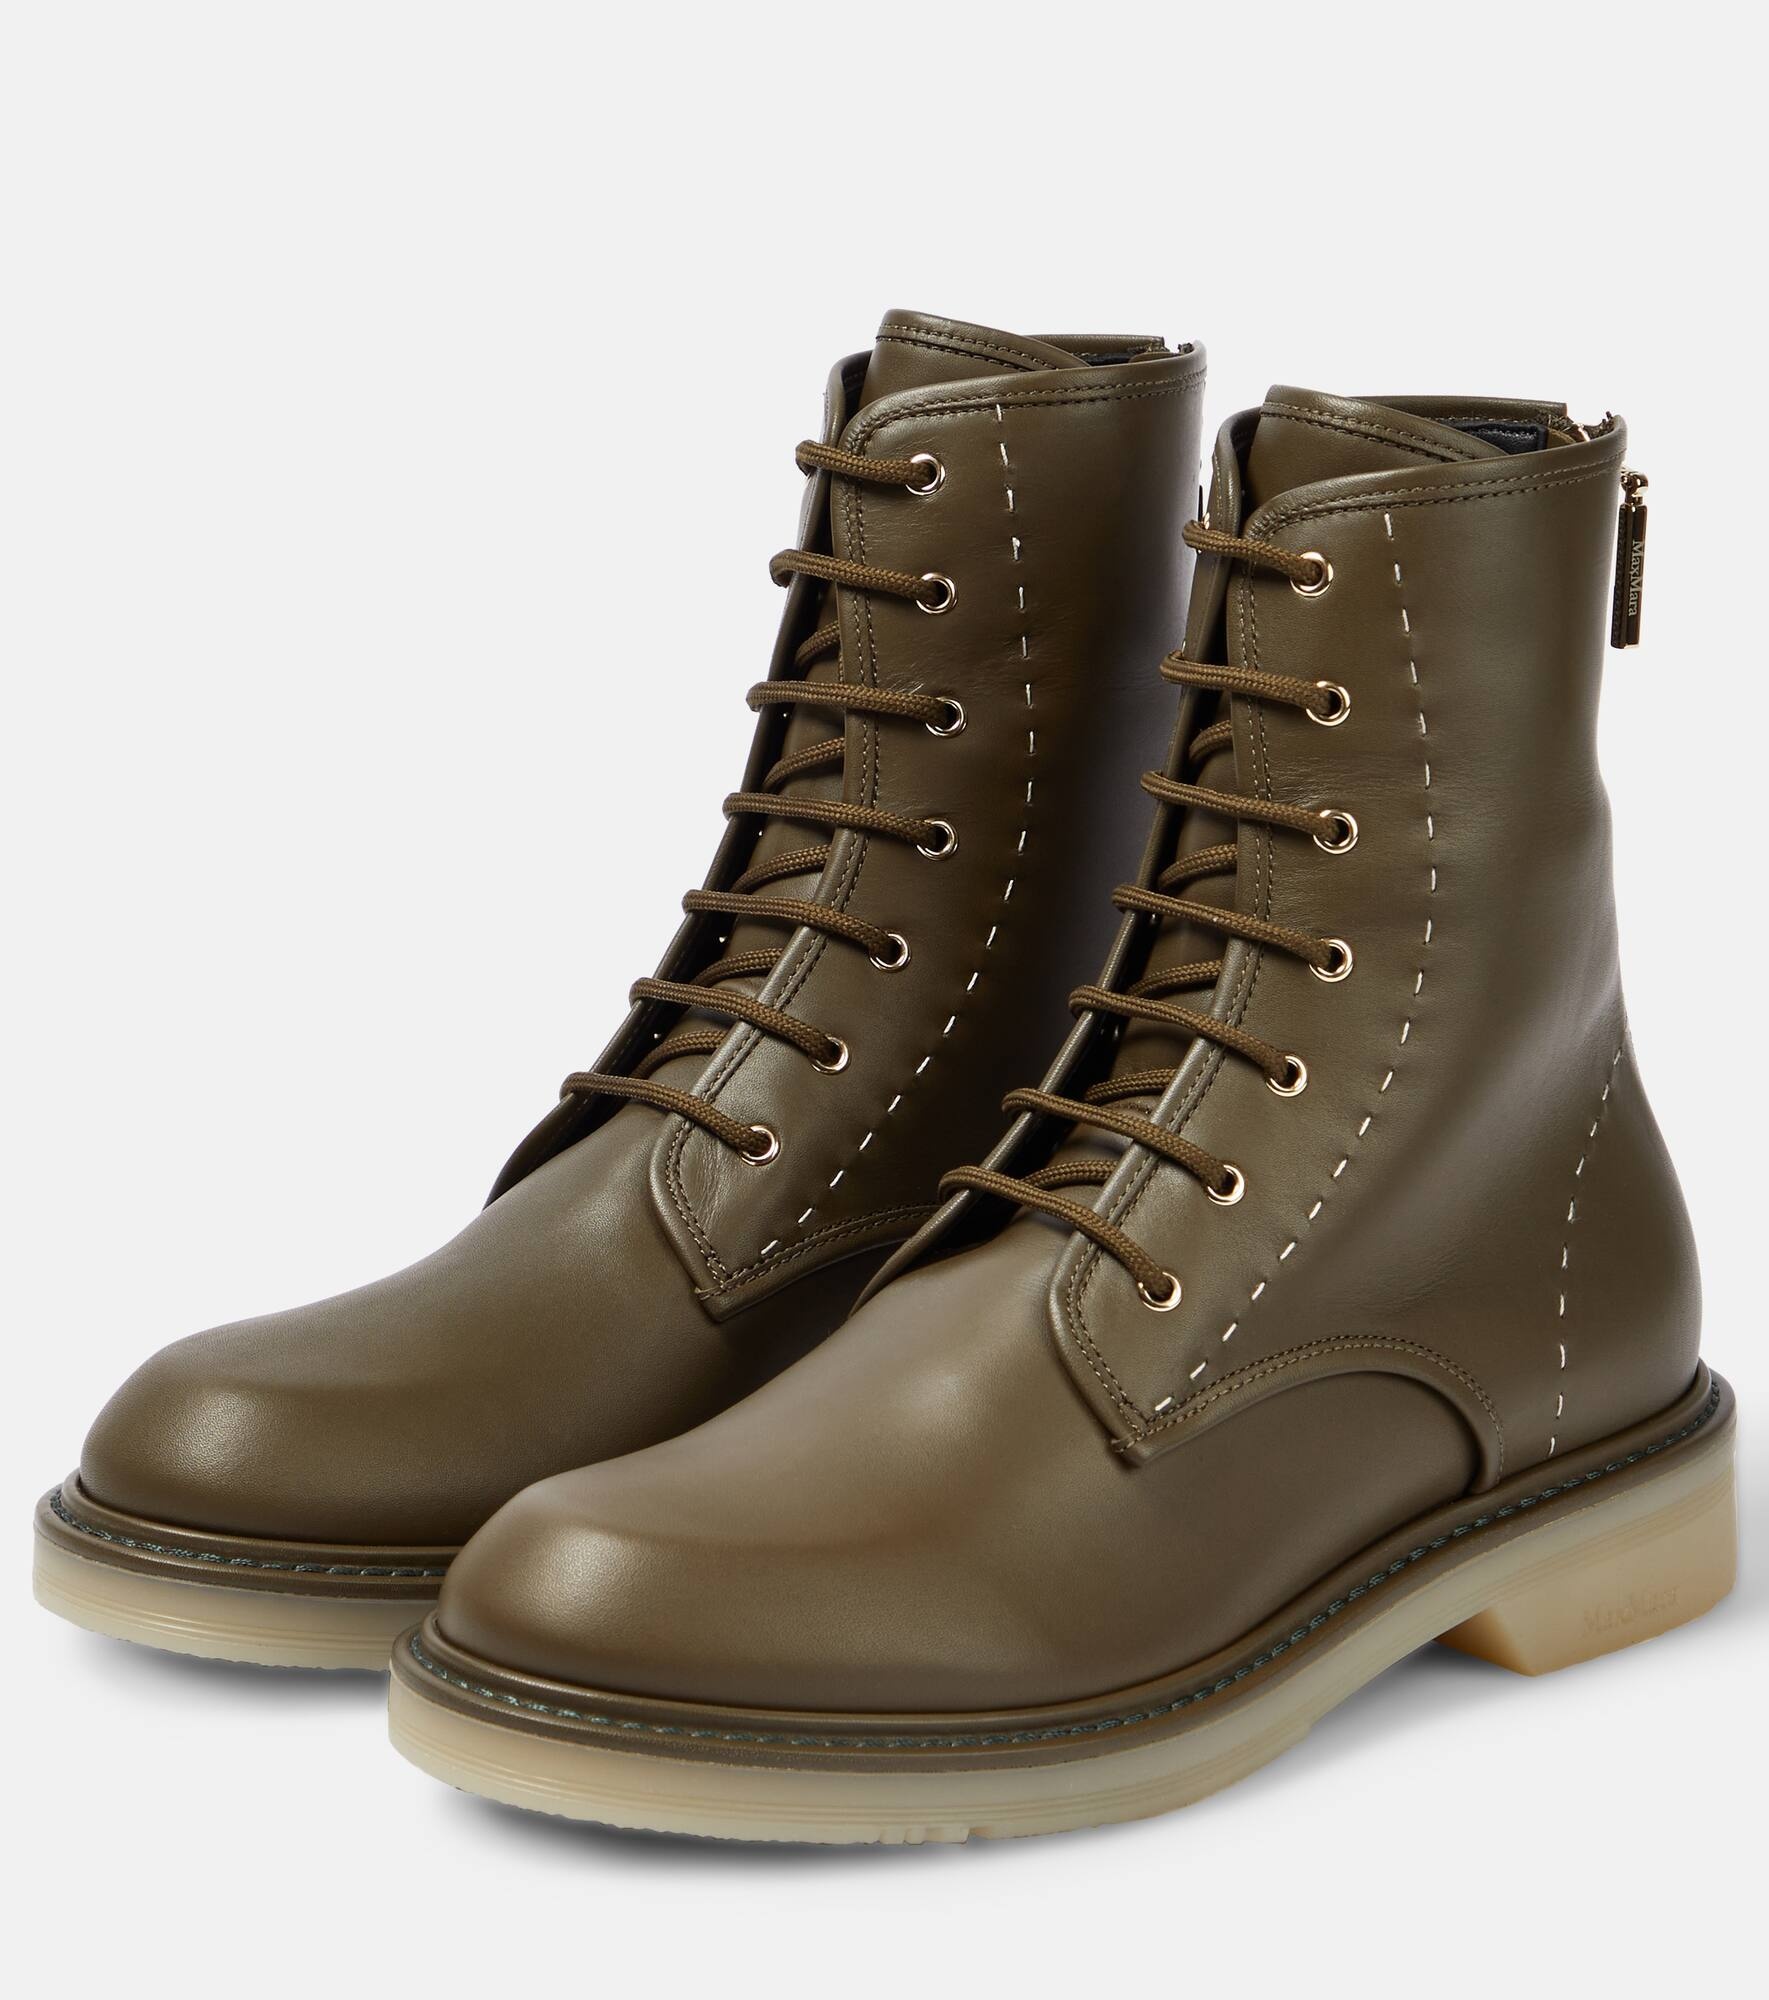 Leather combat boots - 5